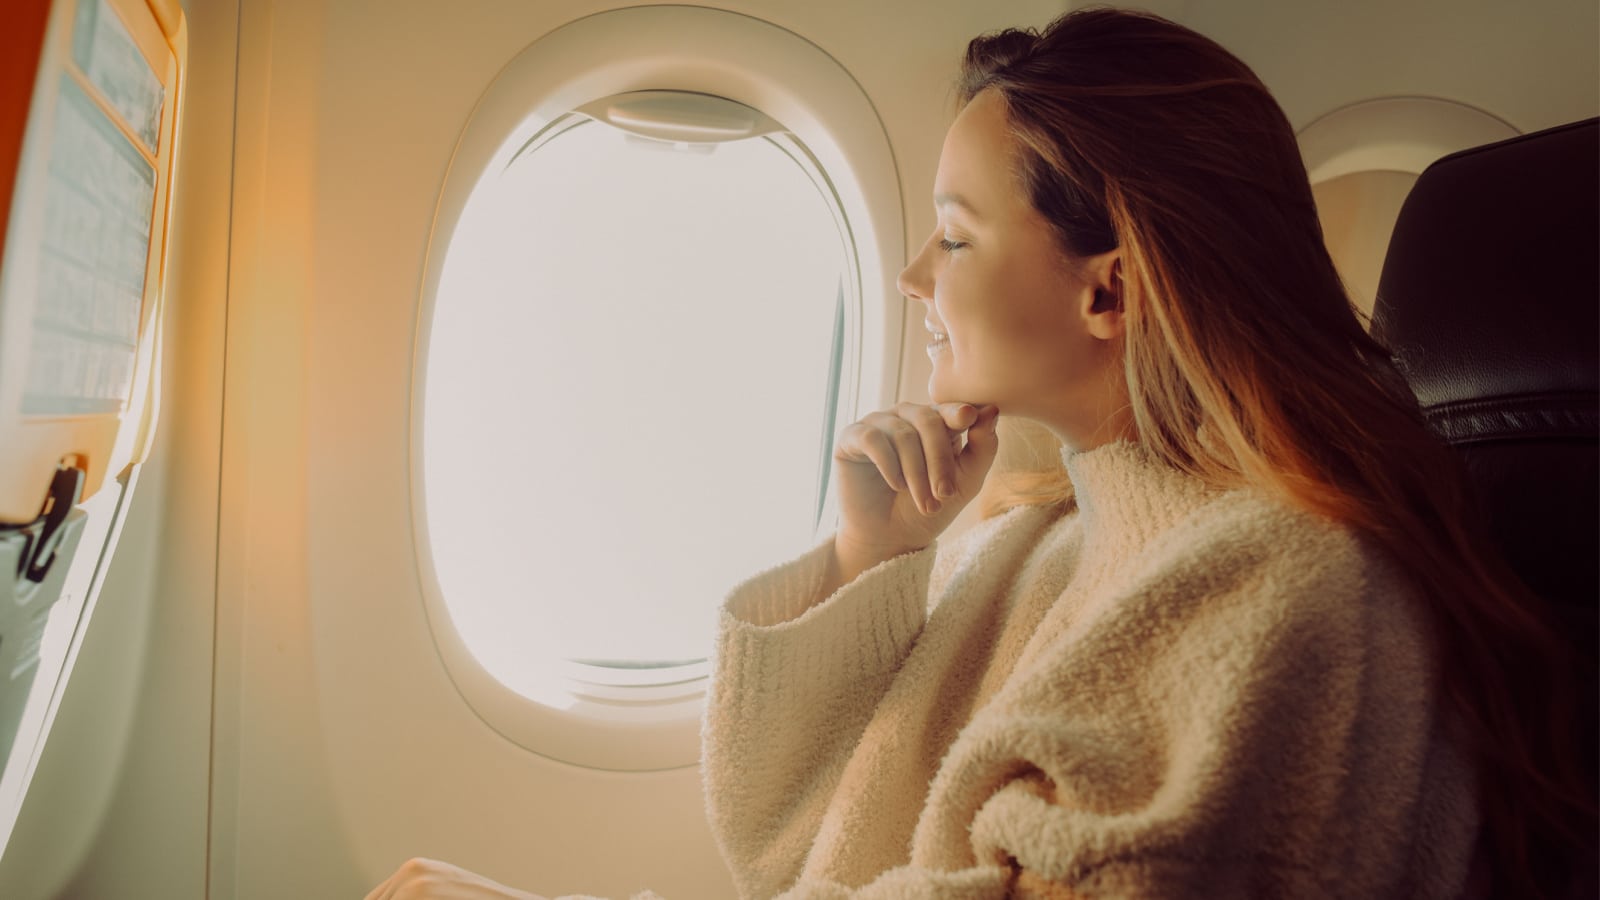 <p>Recently, some frequent travelers suggested preparing for a long-haul flight on an online platform.</p> <p><strong>Read more: <a href="https://www.have-clothes-will-travel.com/10-helpful-tips-for-conquering-long-haul-flights/" rel="noreferrer noopener">Mastering Long-Haul Flights: 11 Useful Tips for a Smooth Journey</a></strong></p>